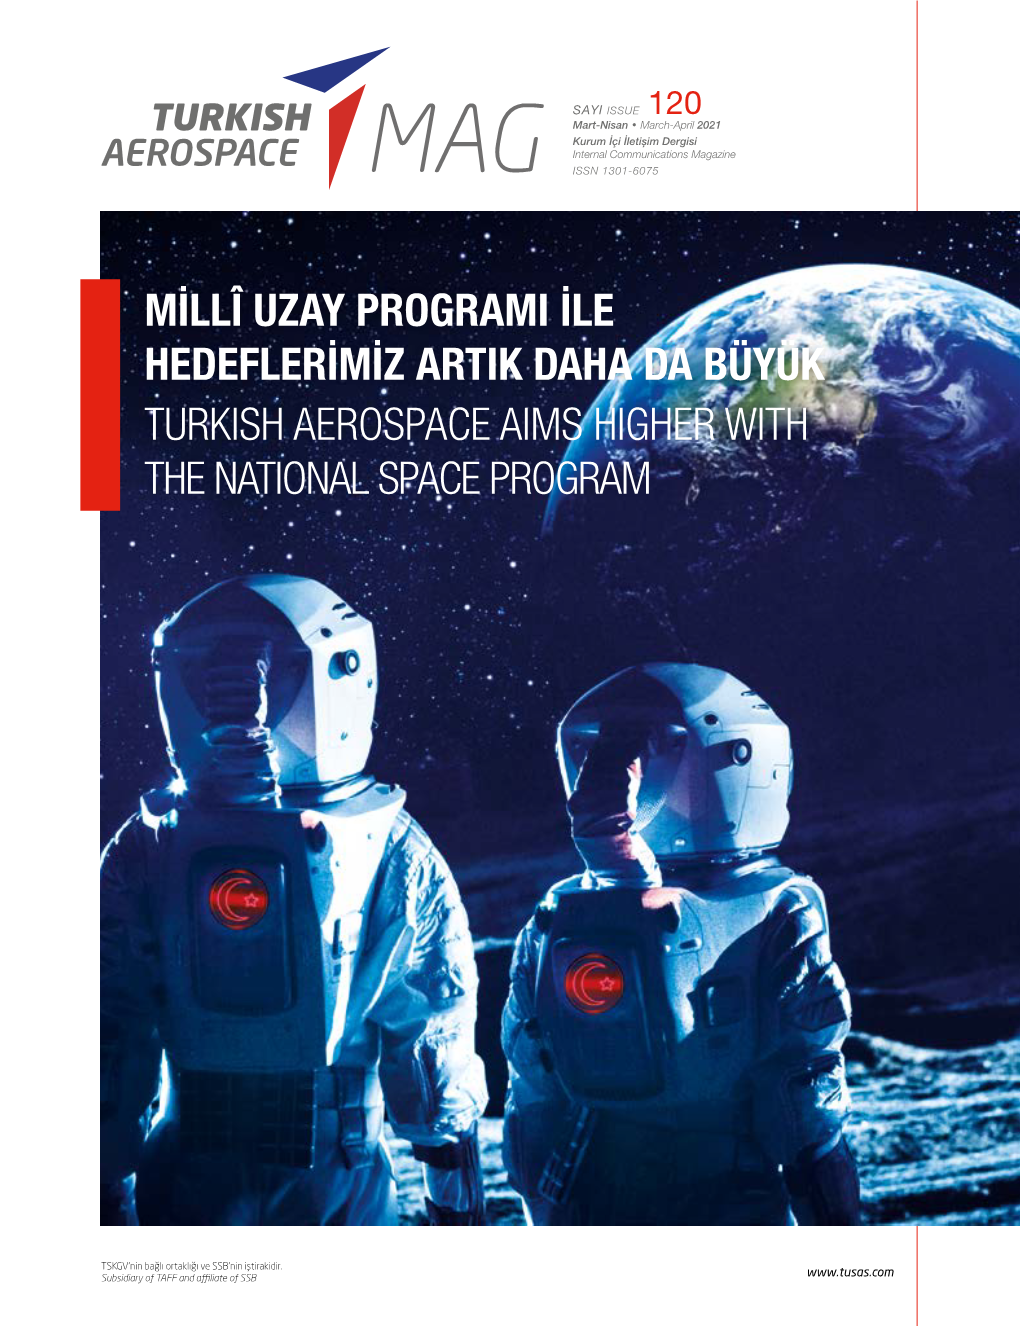 Turkish Aerospace Aims Higher with the National Space Program